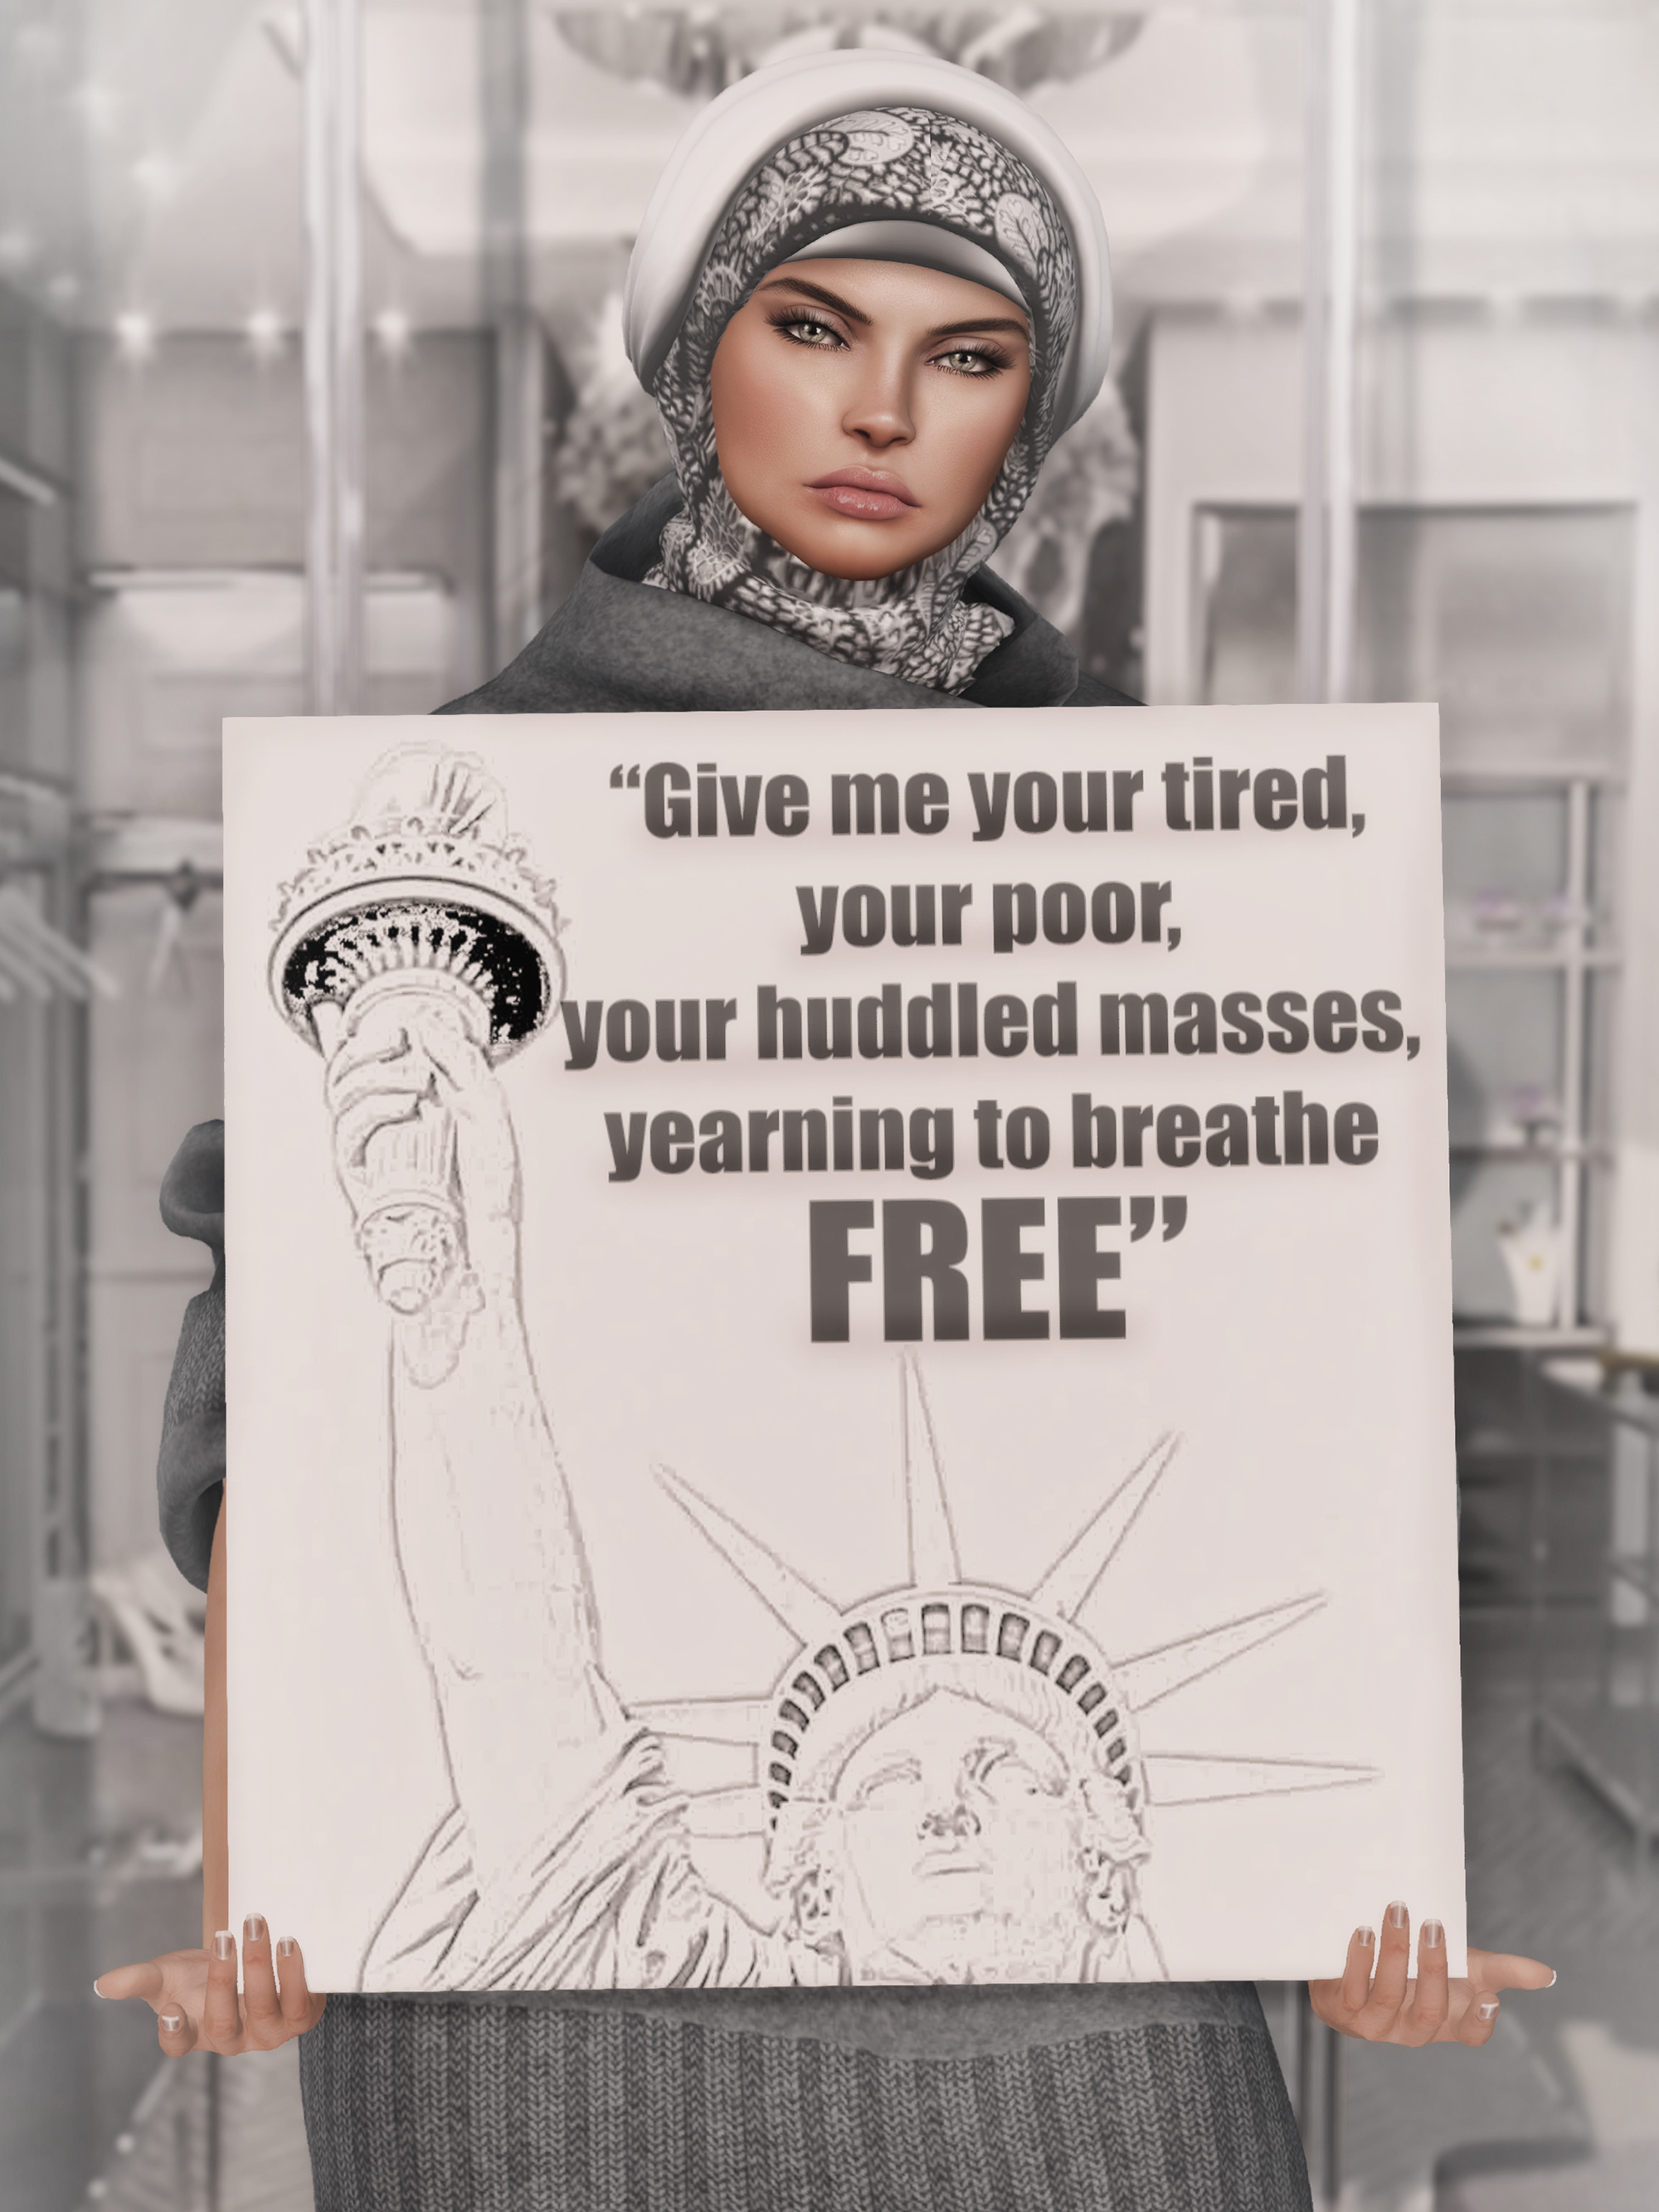 A digital avatar of a woman in a hijab holds a sign with the statue of liberty on it.